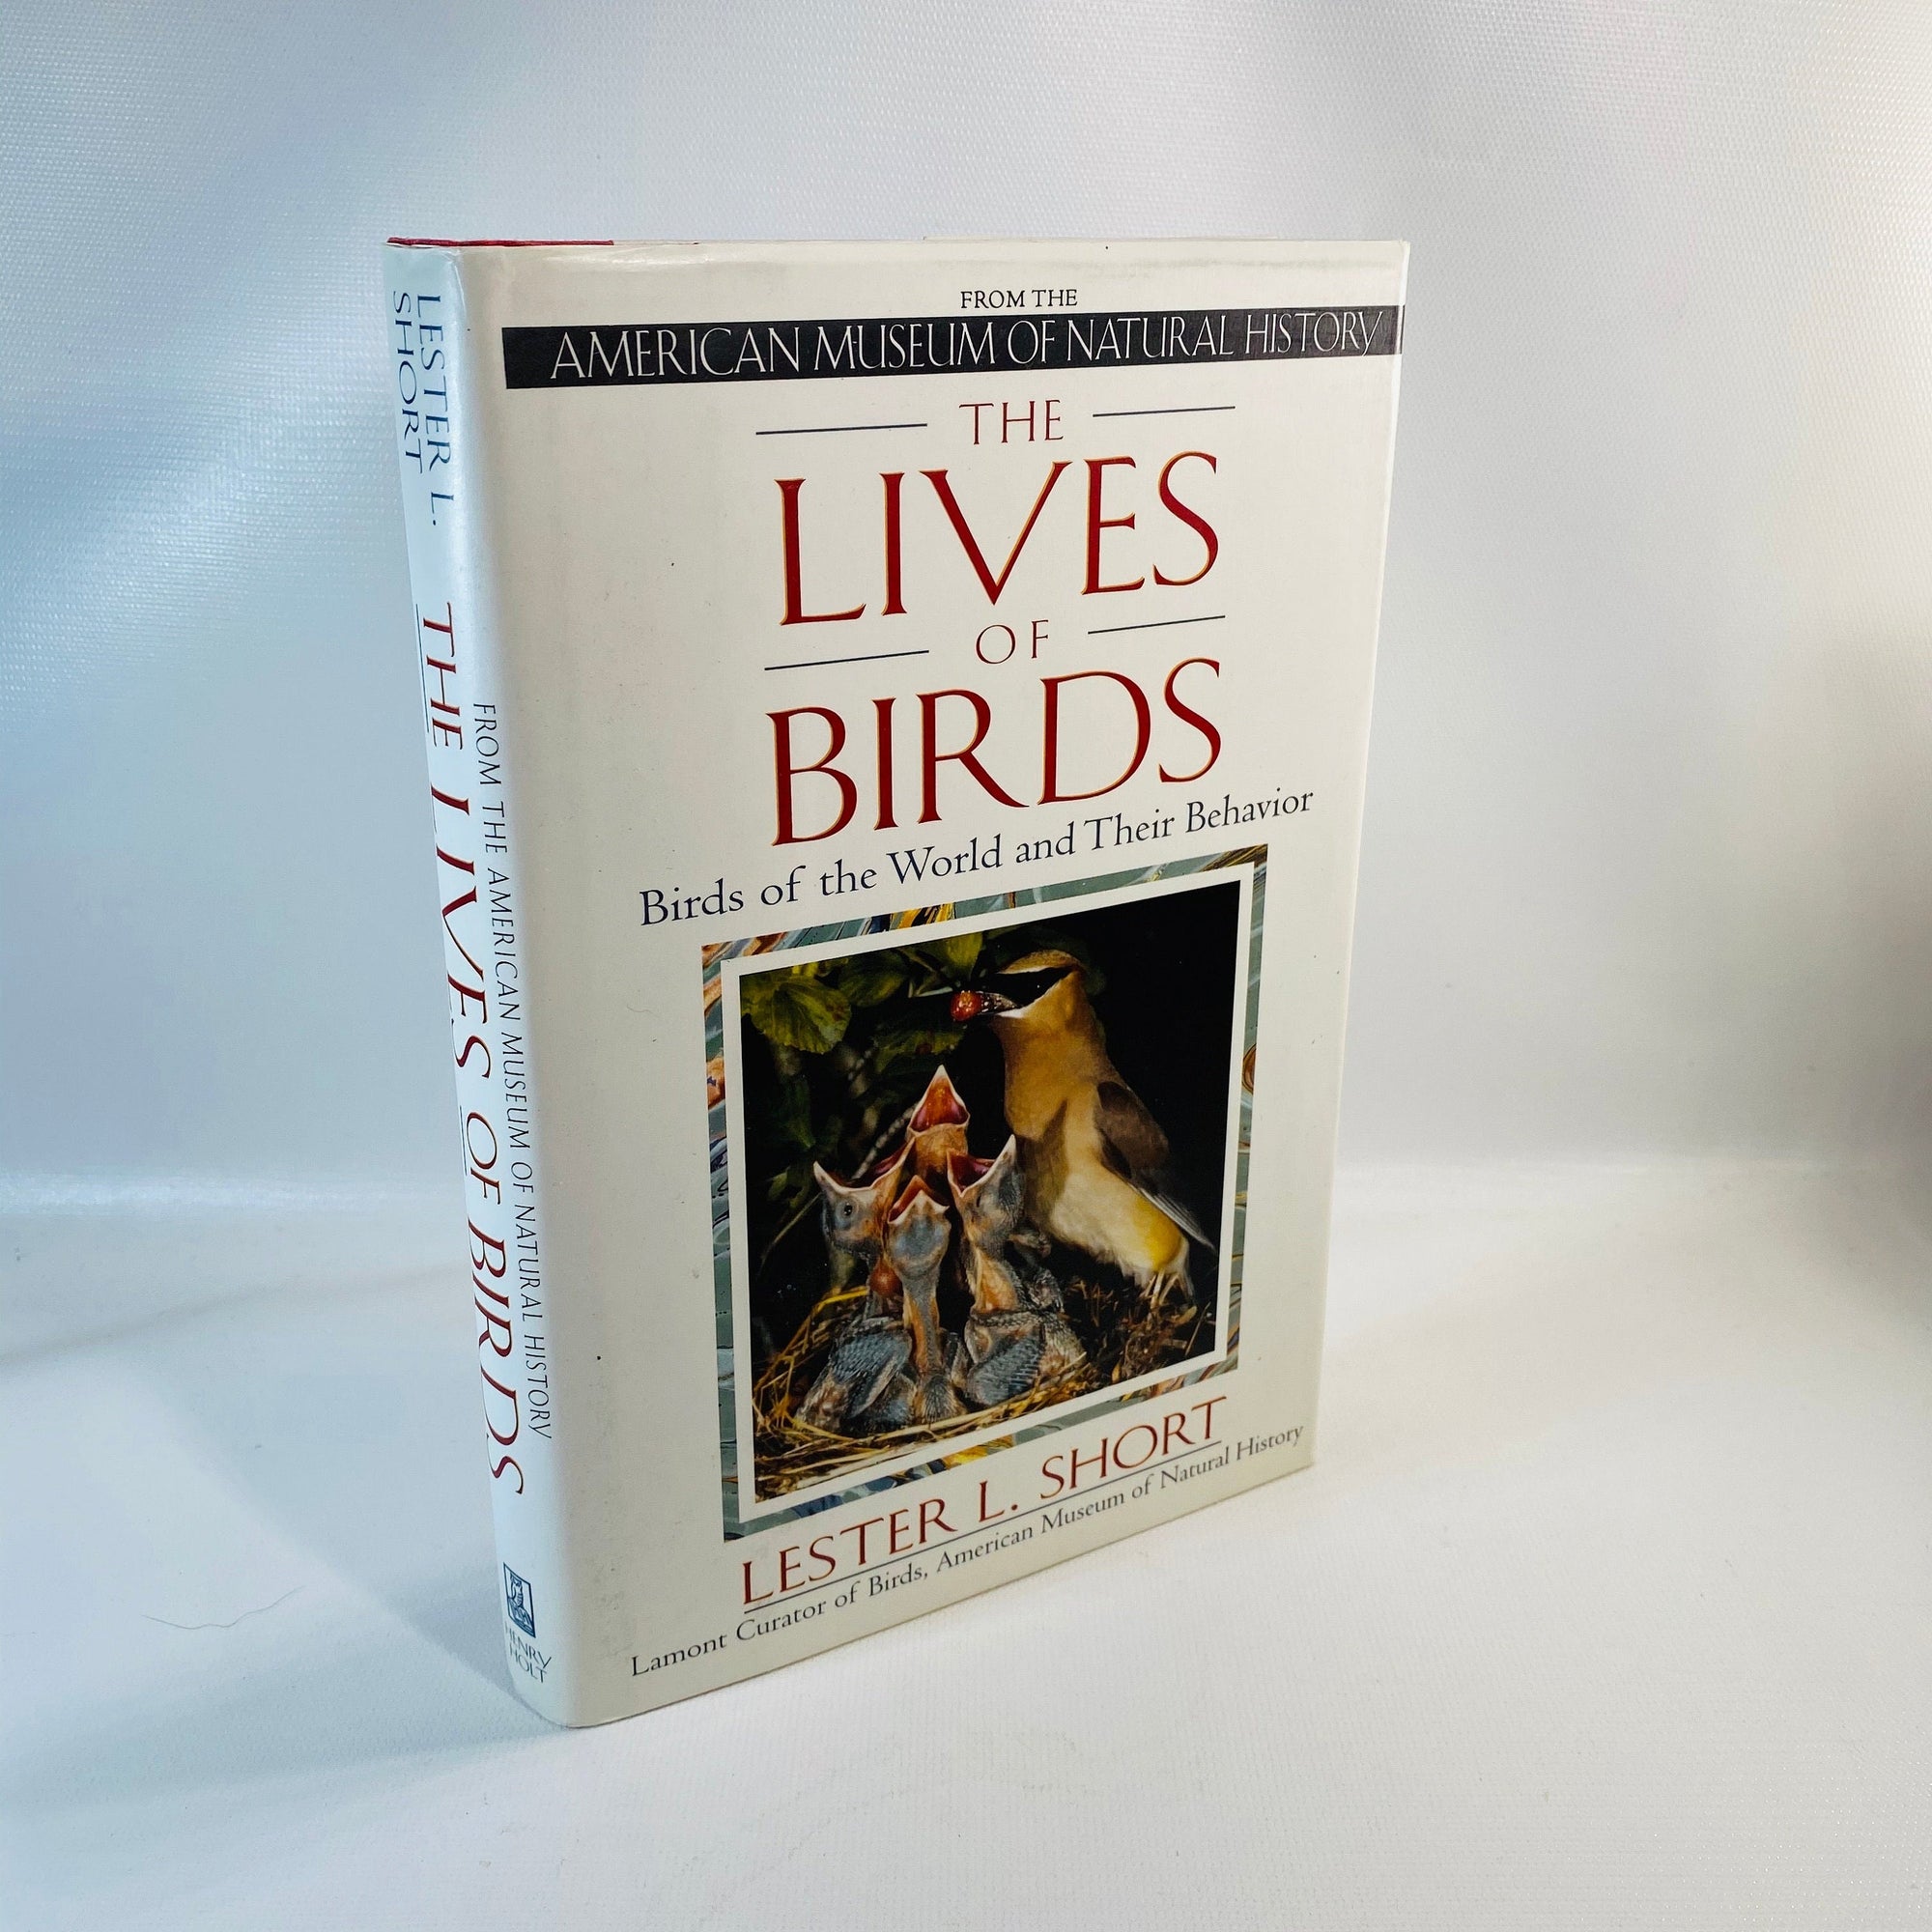 The Lives of Birds by Lester L. Short First Edition 1993 Vintage Book